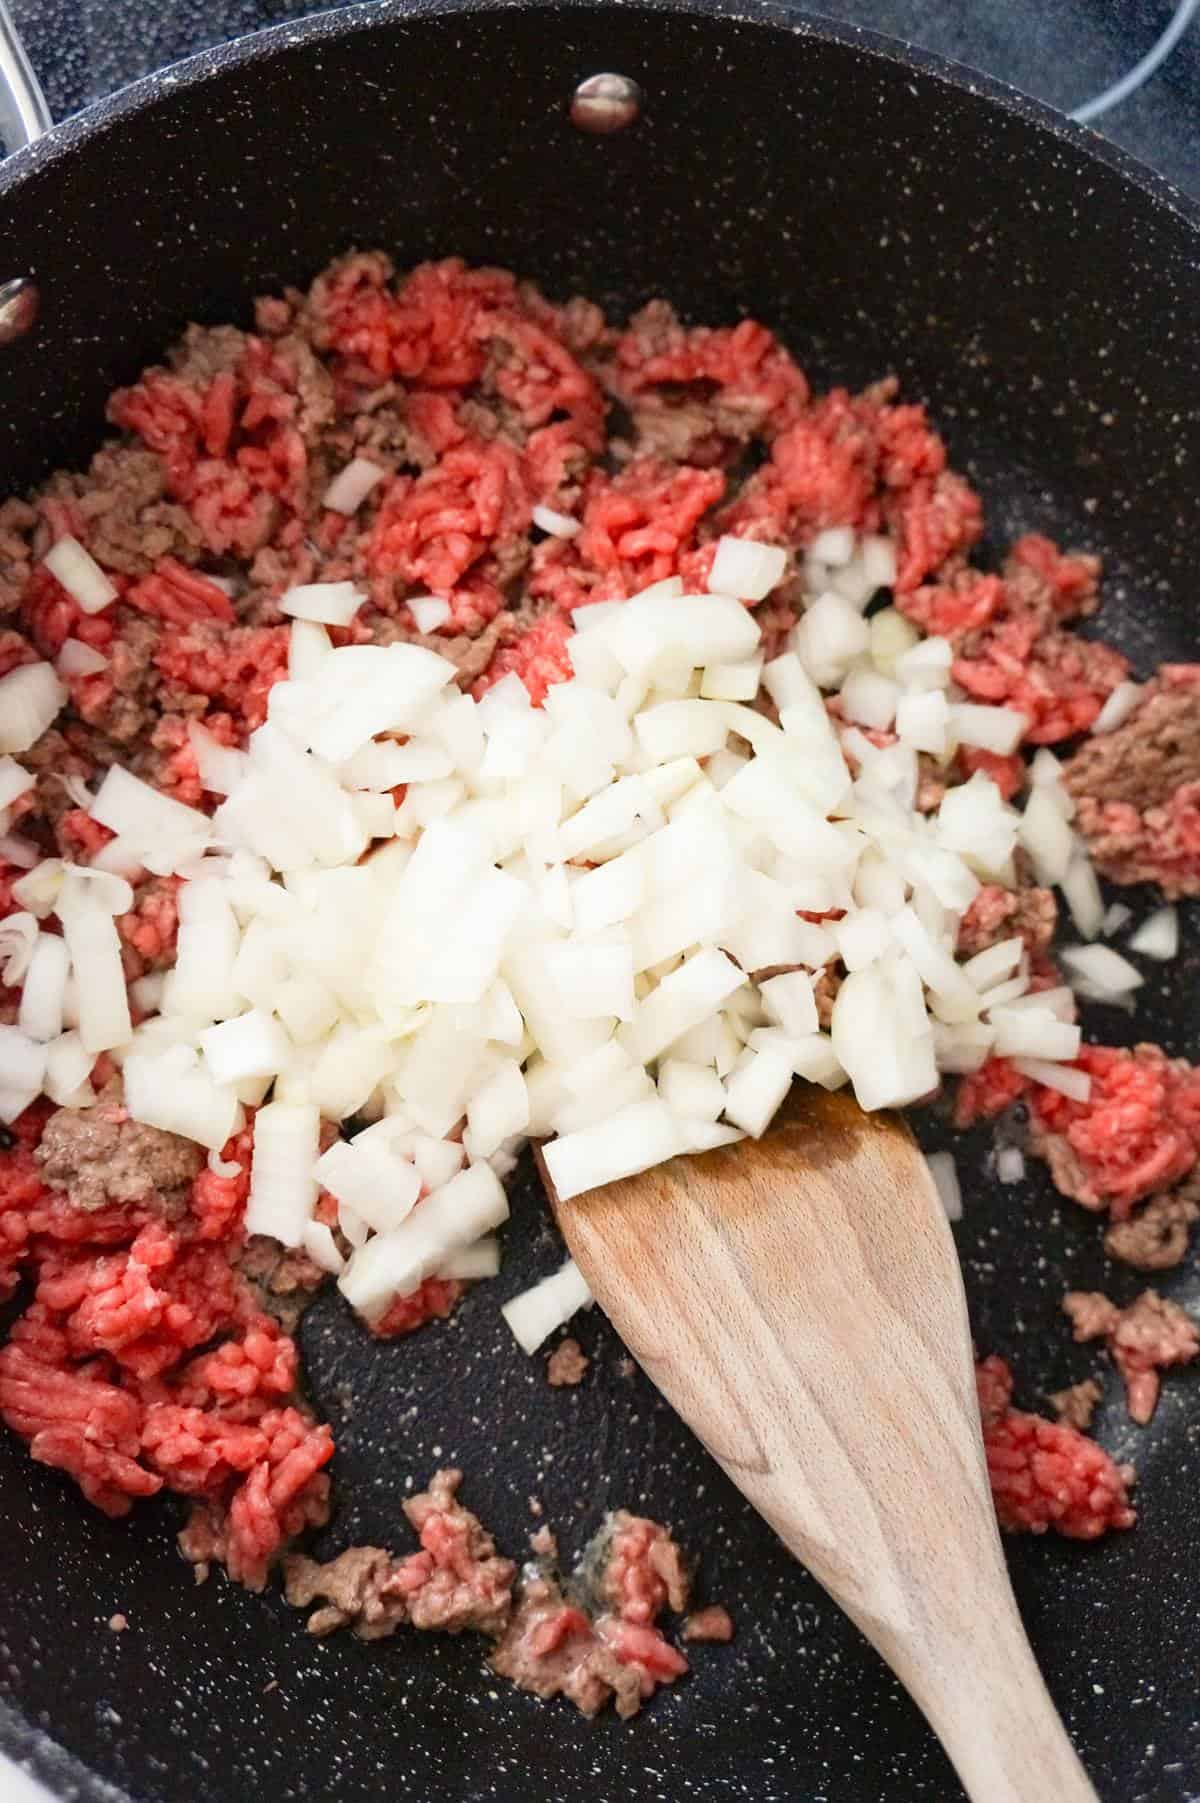 diced onions on top of raw ground beef in a saute pan